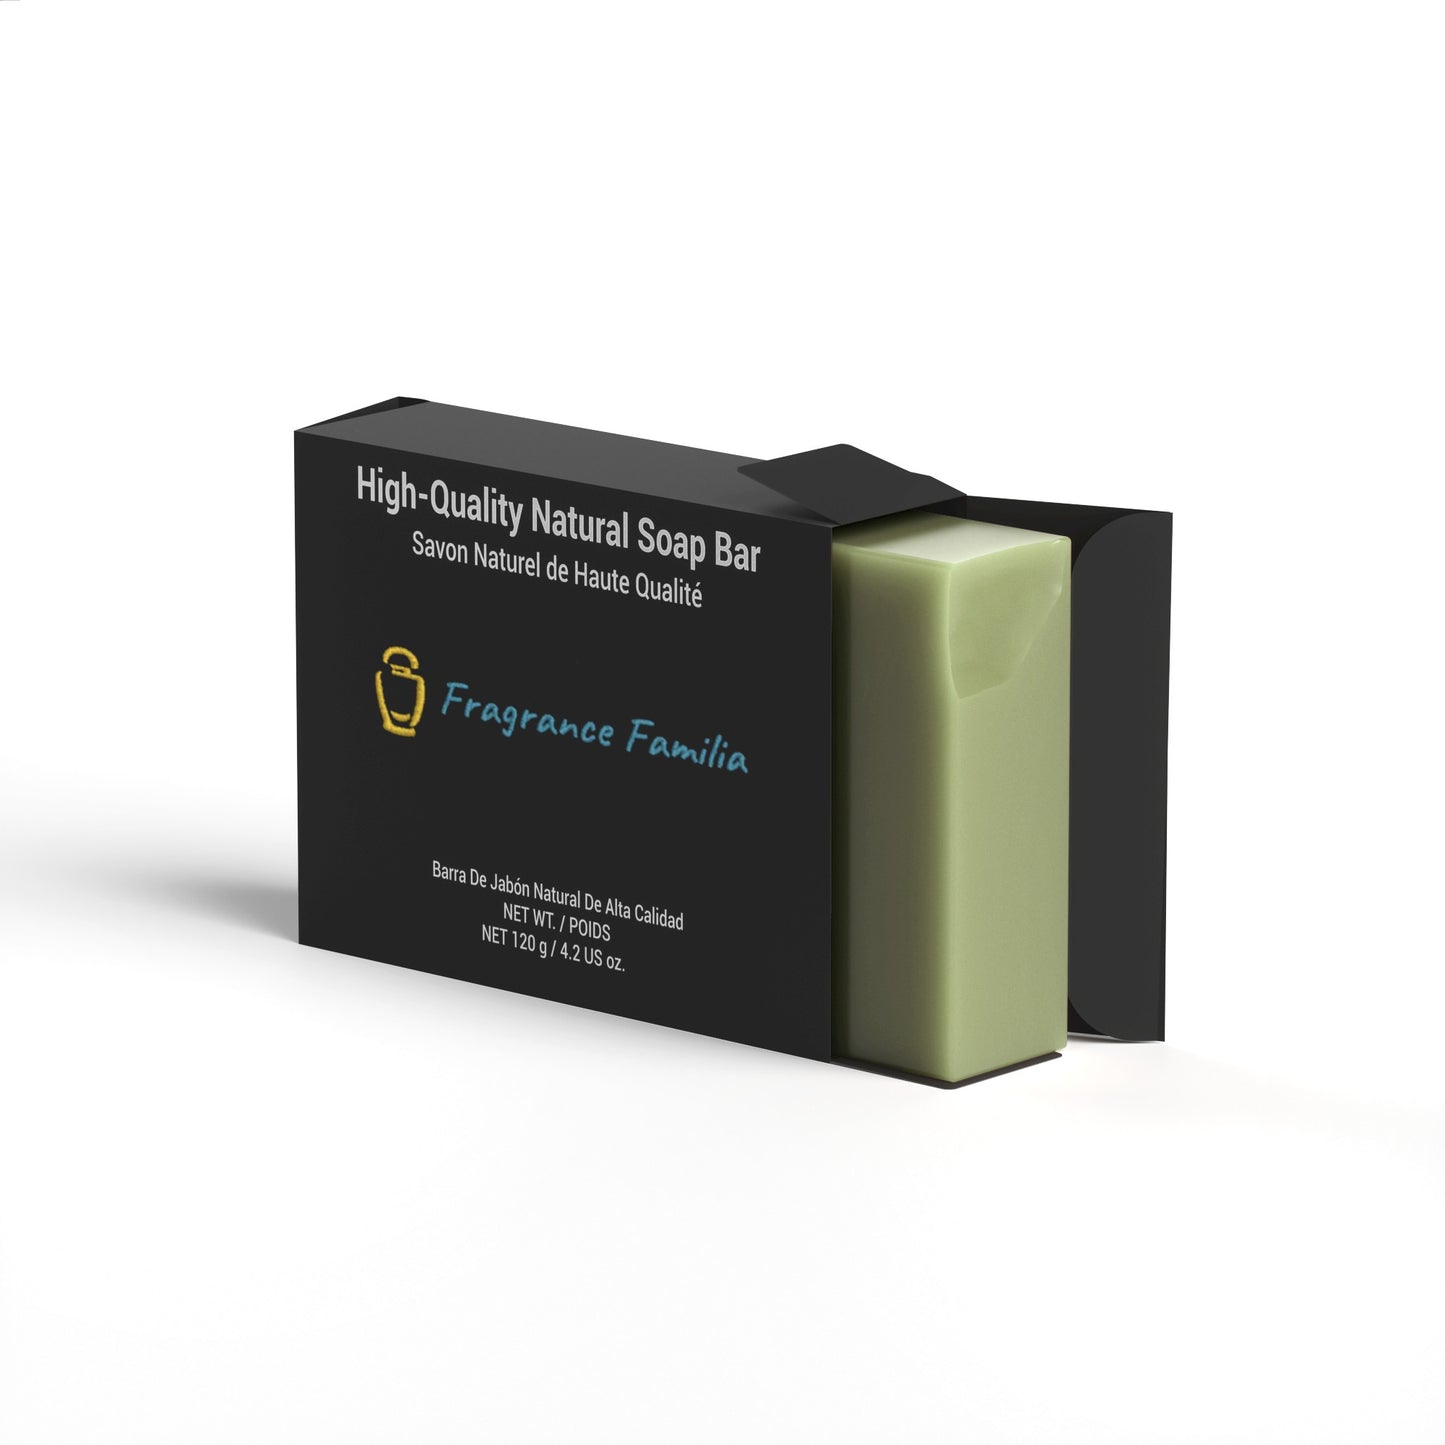 a bar of fragrance familia's organic basil soap contained in packaging